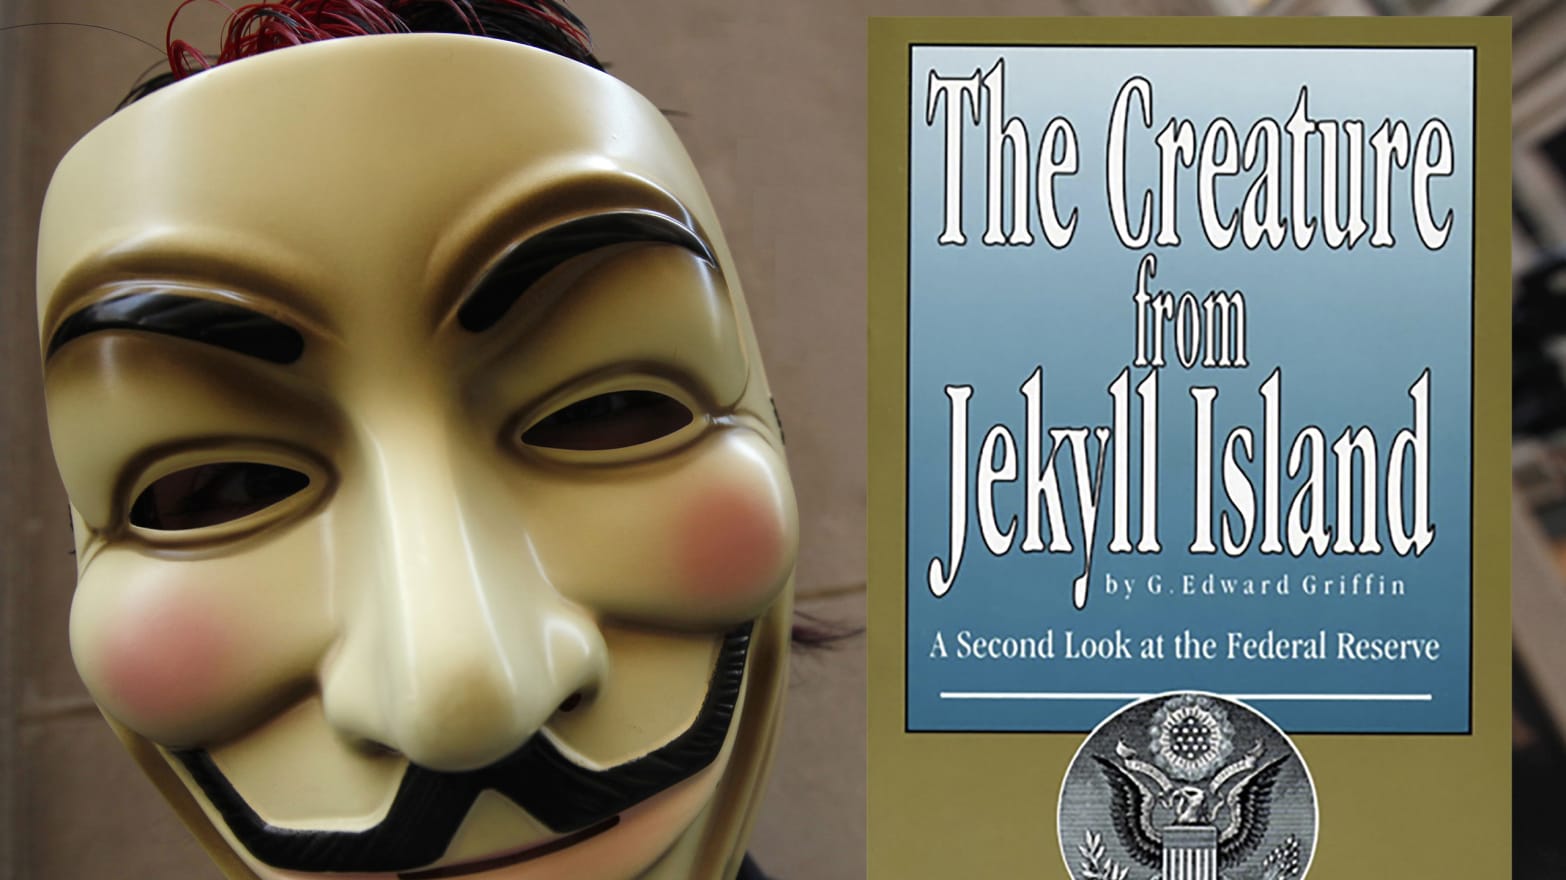 The Story Behind The Creature From Jekyll Island, the Anti-Fed Conspiracy Theory Bible